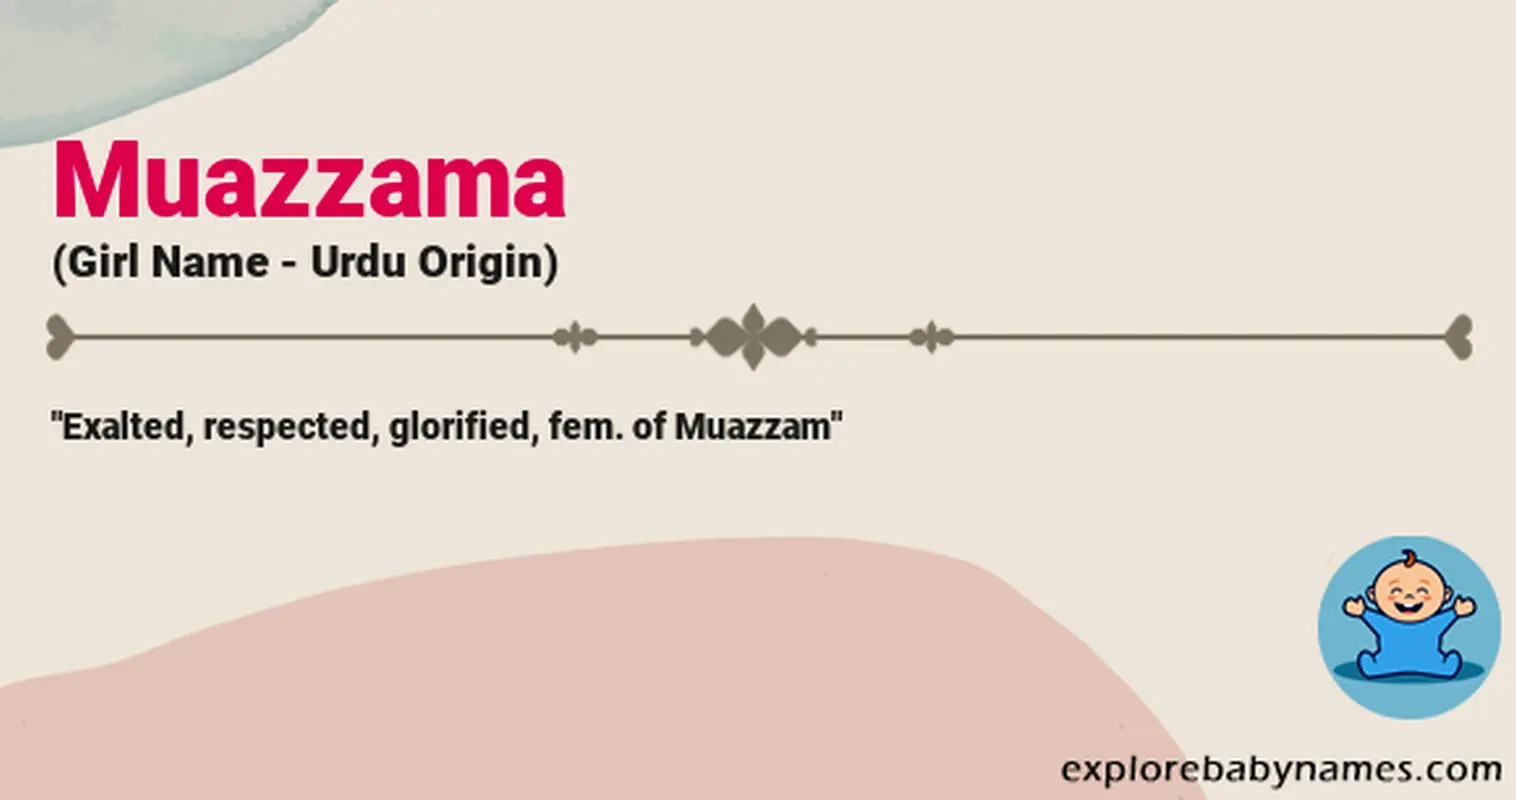 Meaning of Muazzama